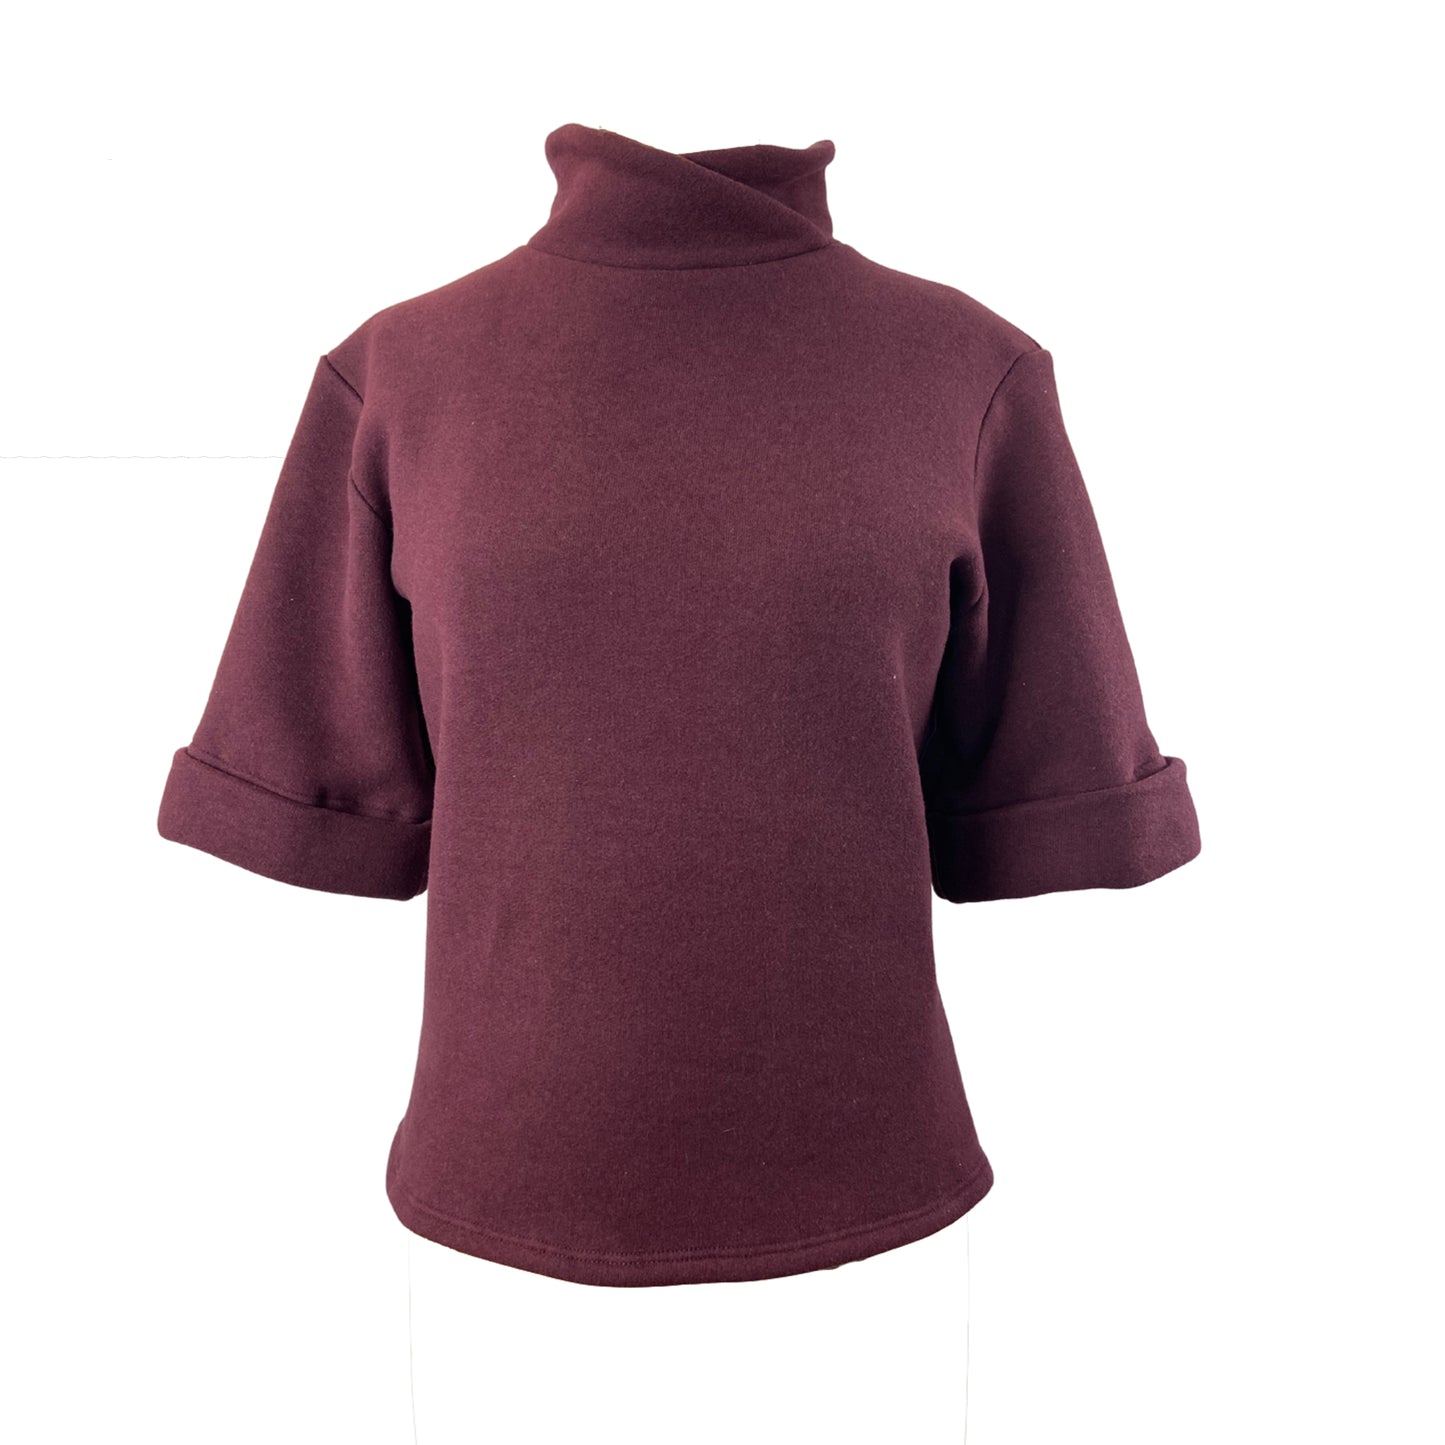 Burgundy sweater with short sleeves and fold over collar